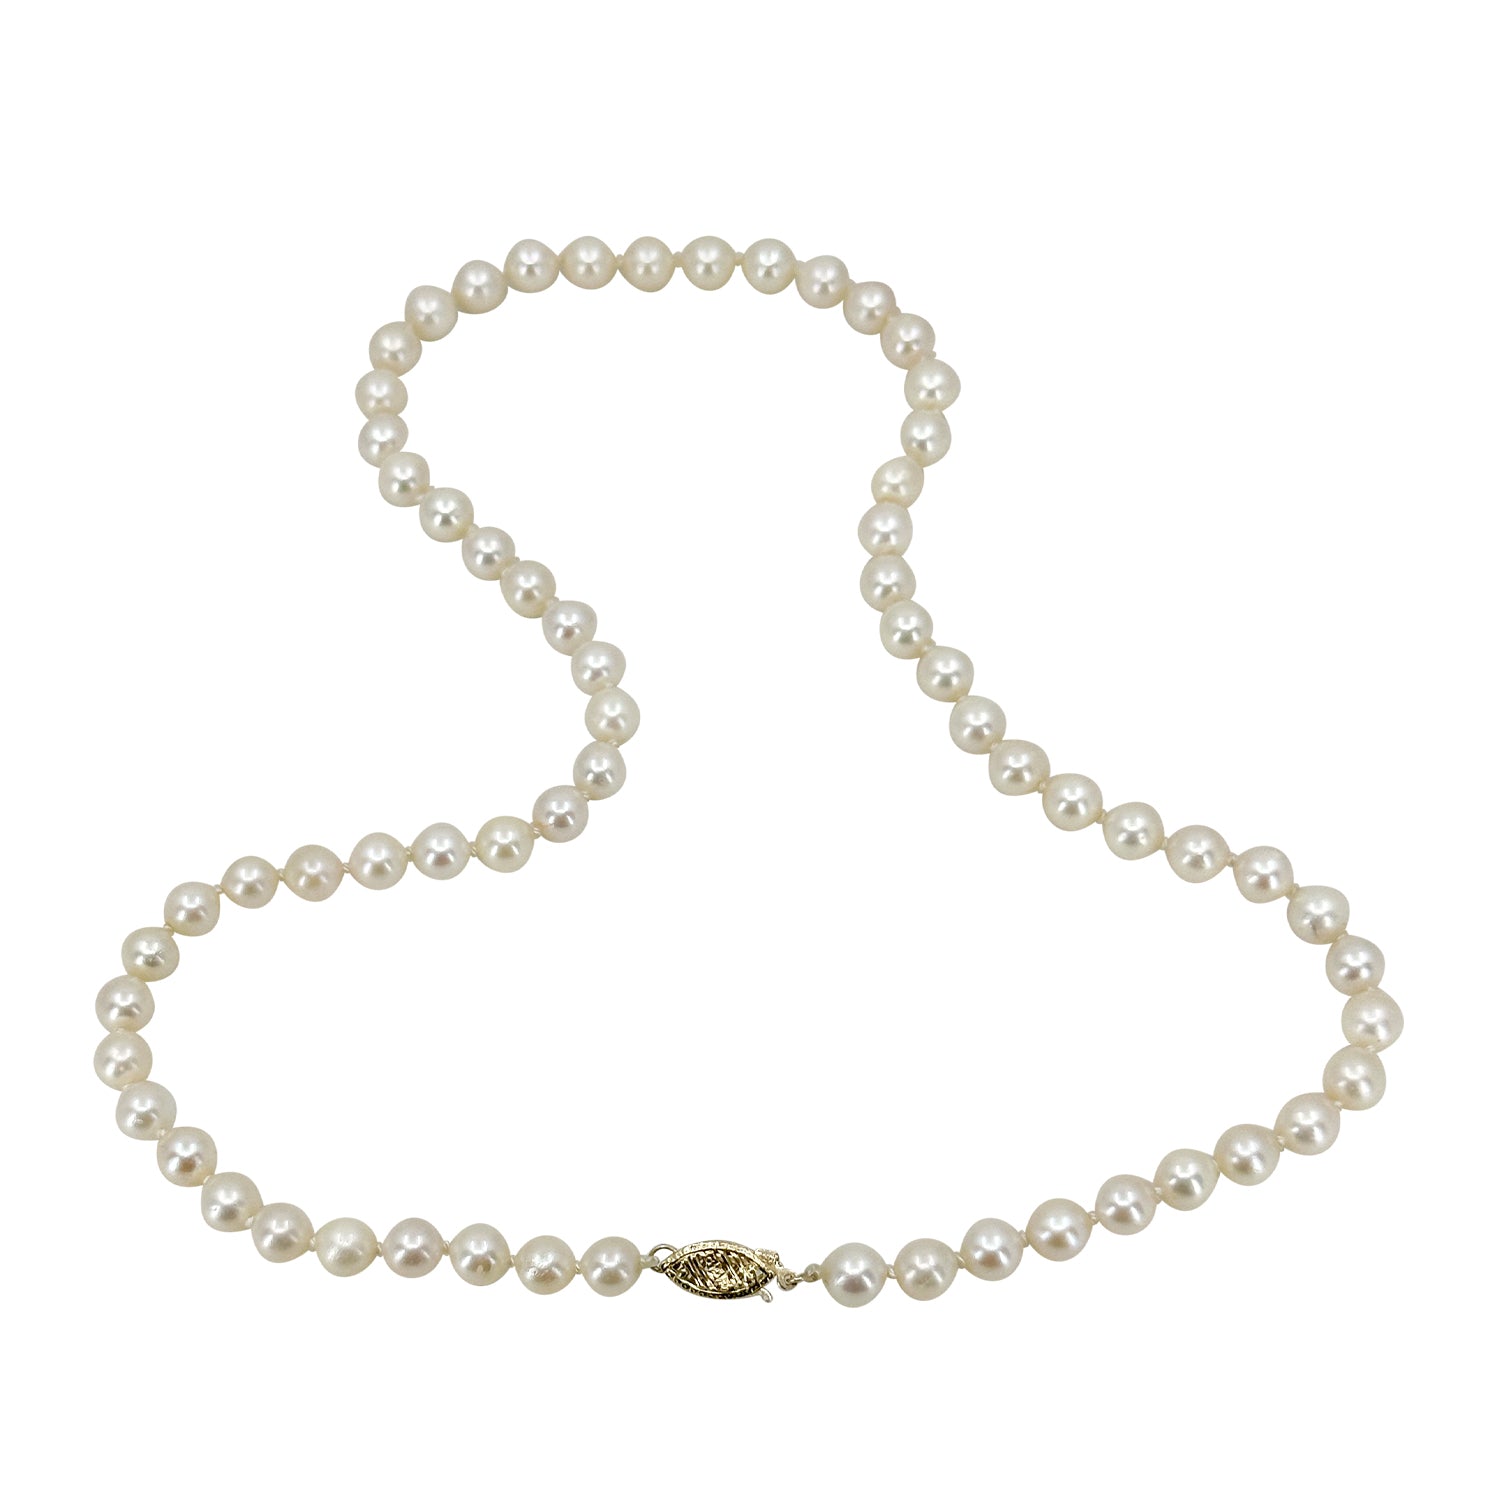 MCM Vintage Japanese Cultured Saltwater Akoya Pearl Necklace - 14K Yellow Gold 18.25 Inch